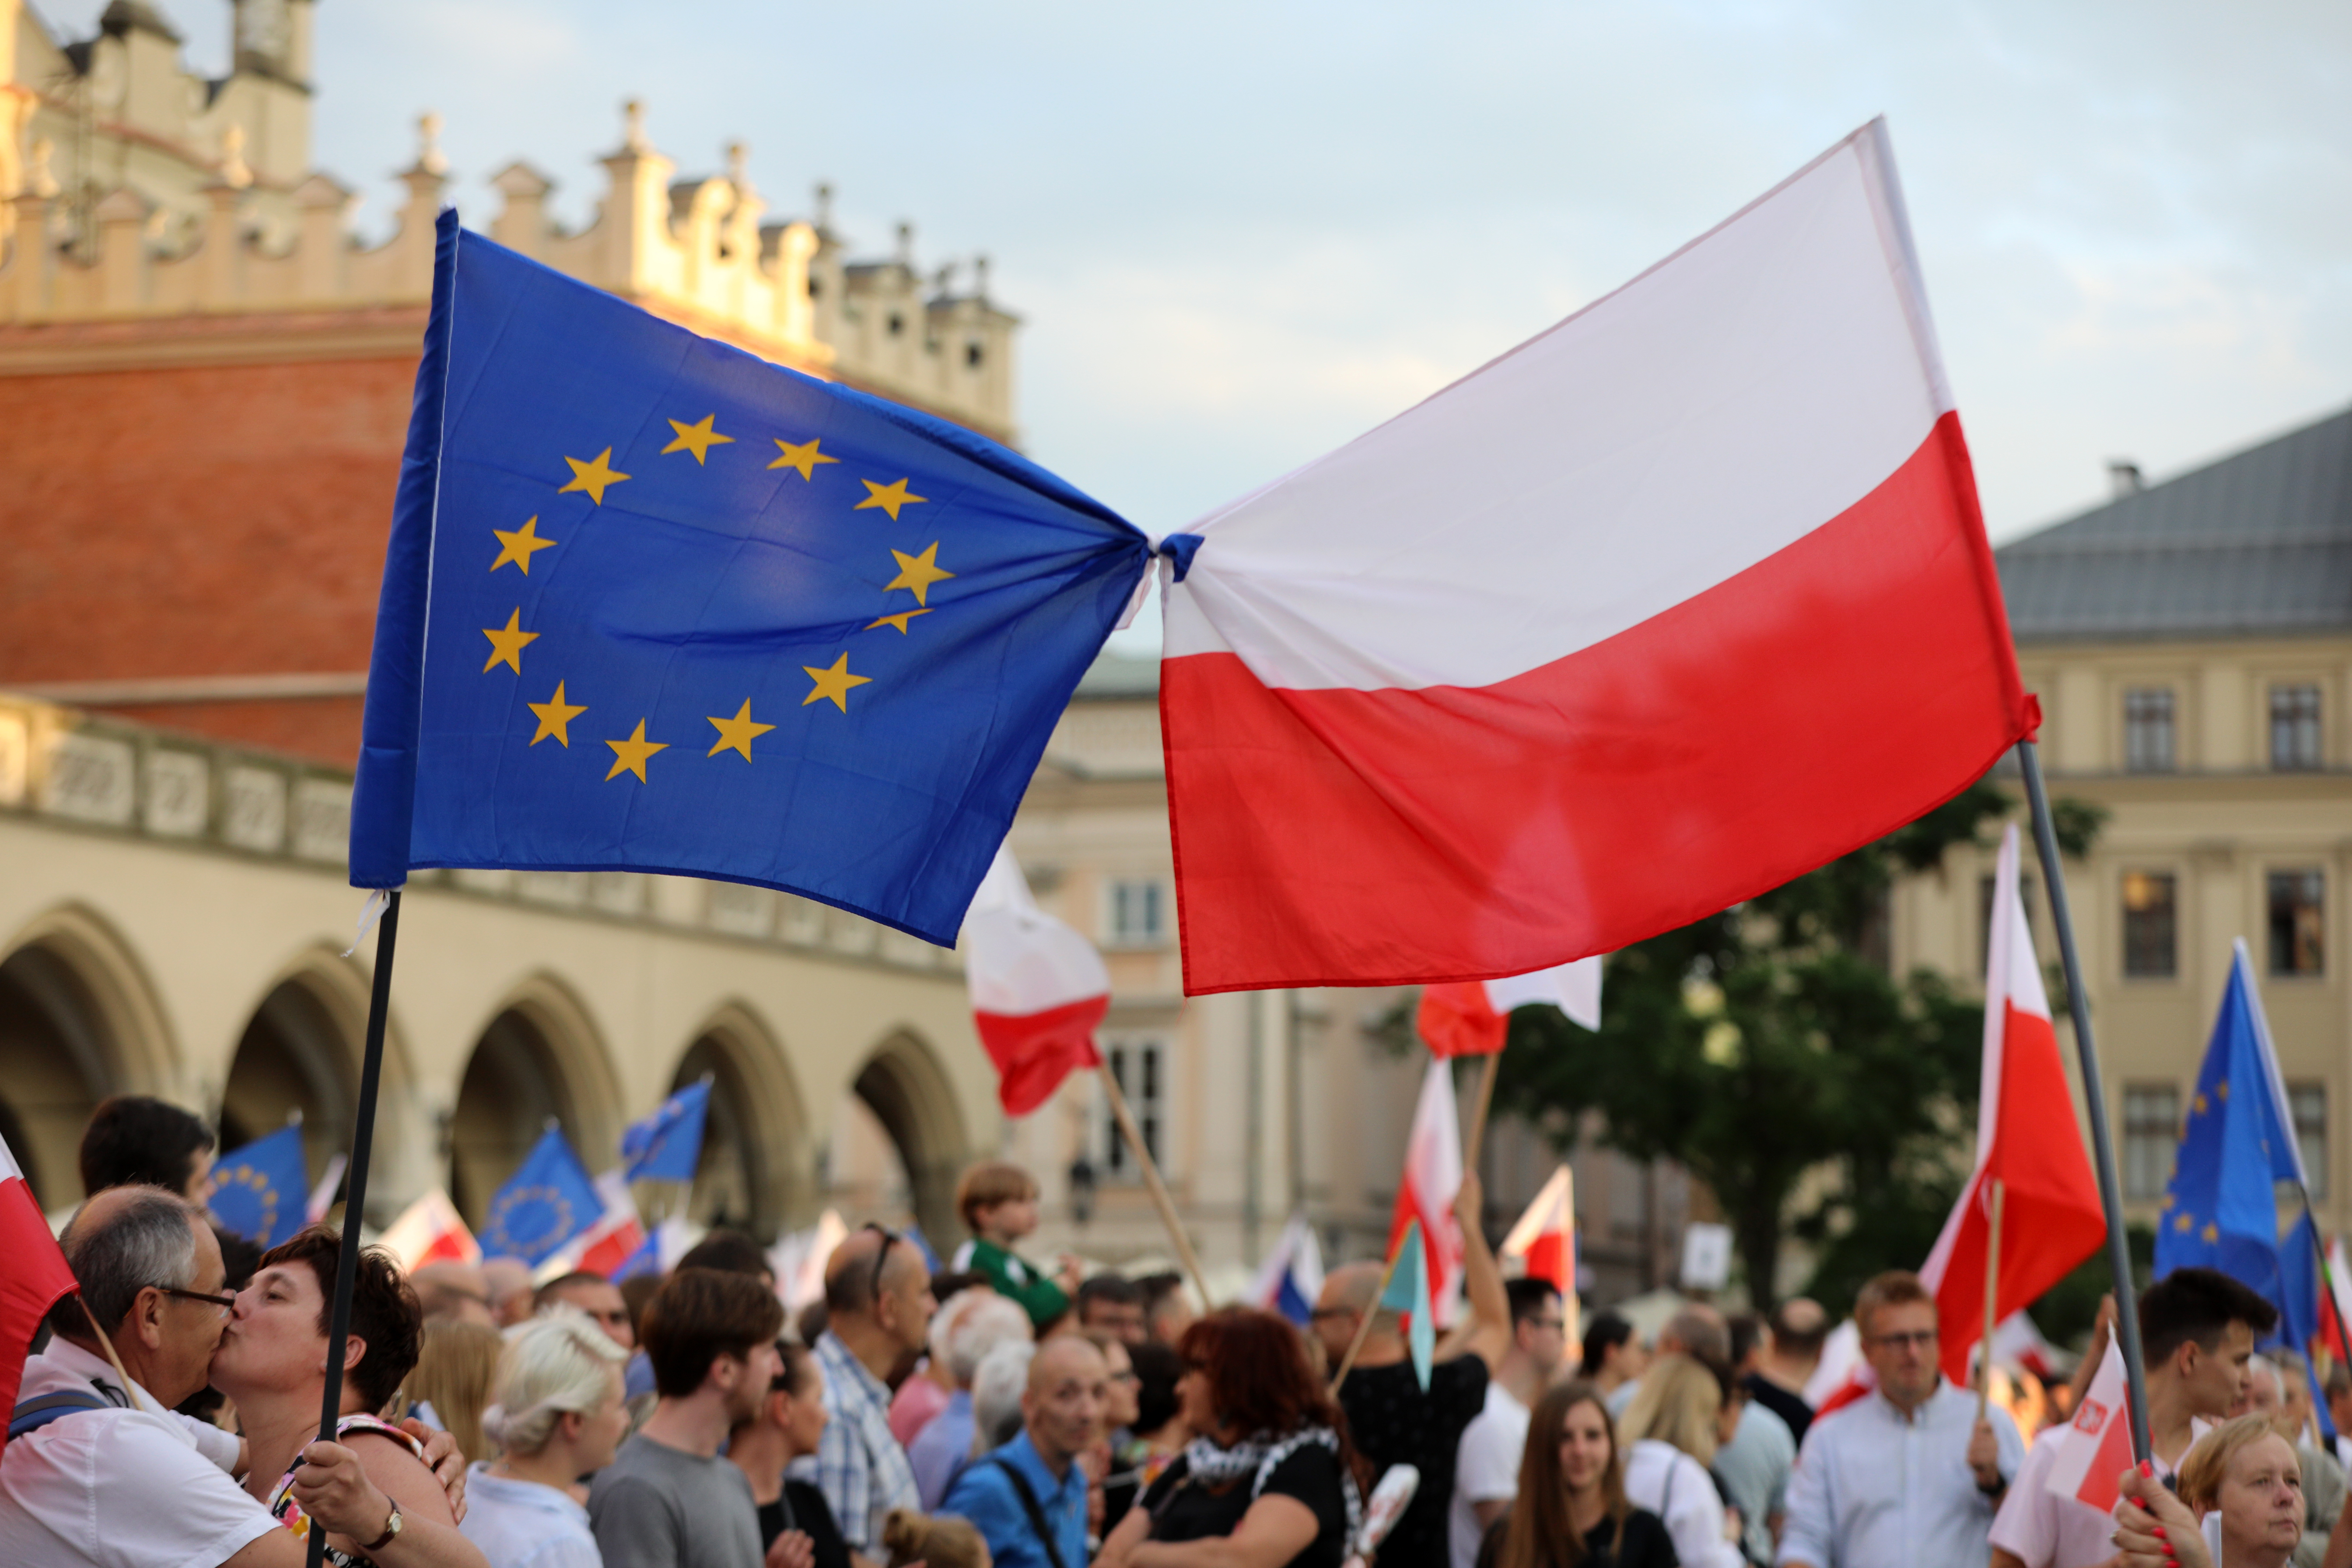 Cracow, Poland - People protest against violation of the constitutional law in Poland in defense of the triad of division of power and independence of the highest court in Poland, July 23, 2017